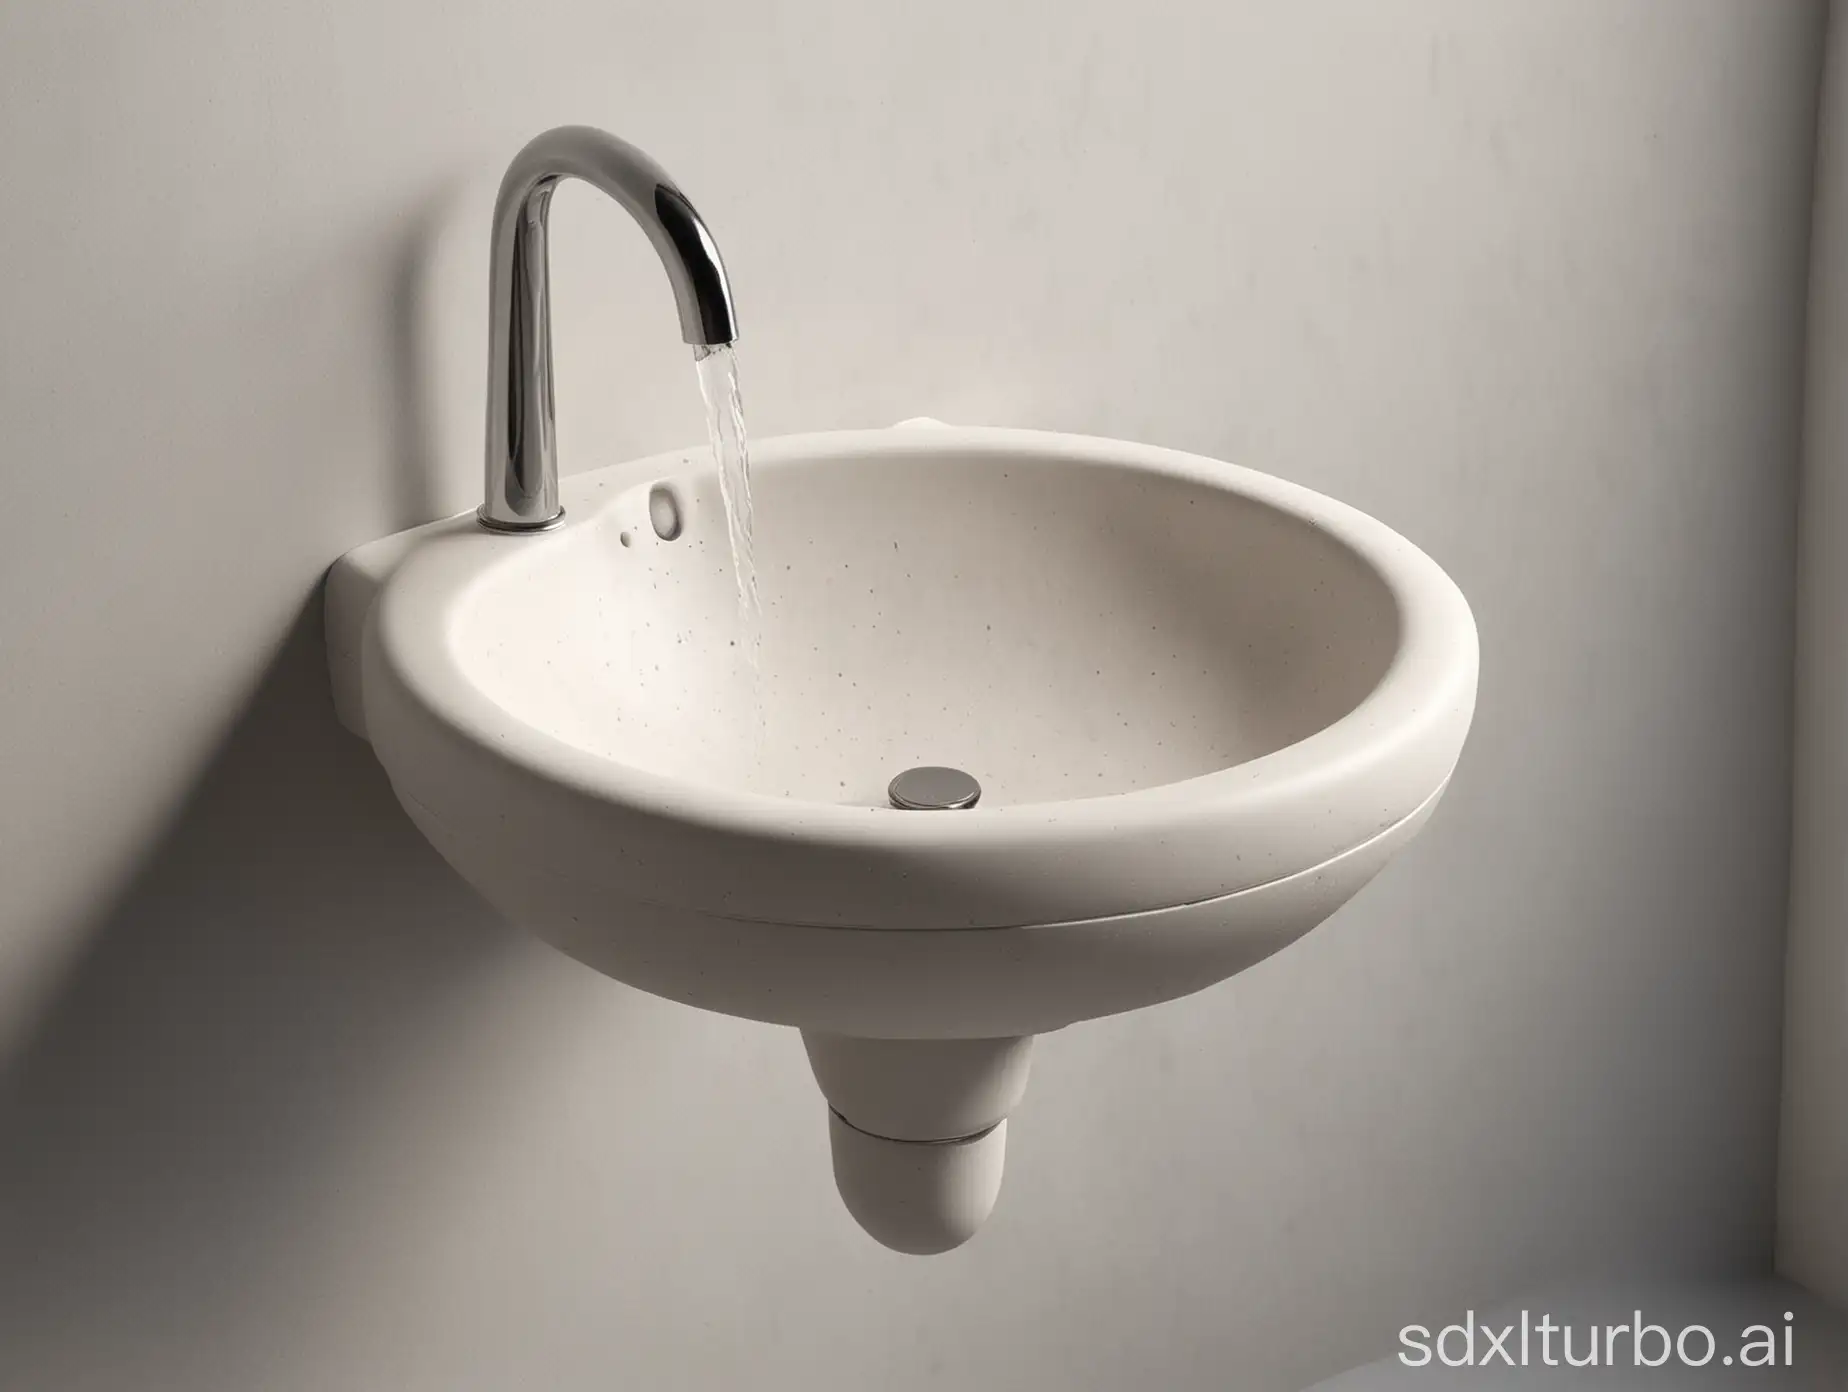 Adjustable-Ceramic-Hand-Basin-with-Rubber-Bottom-for-Water-Saving